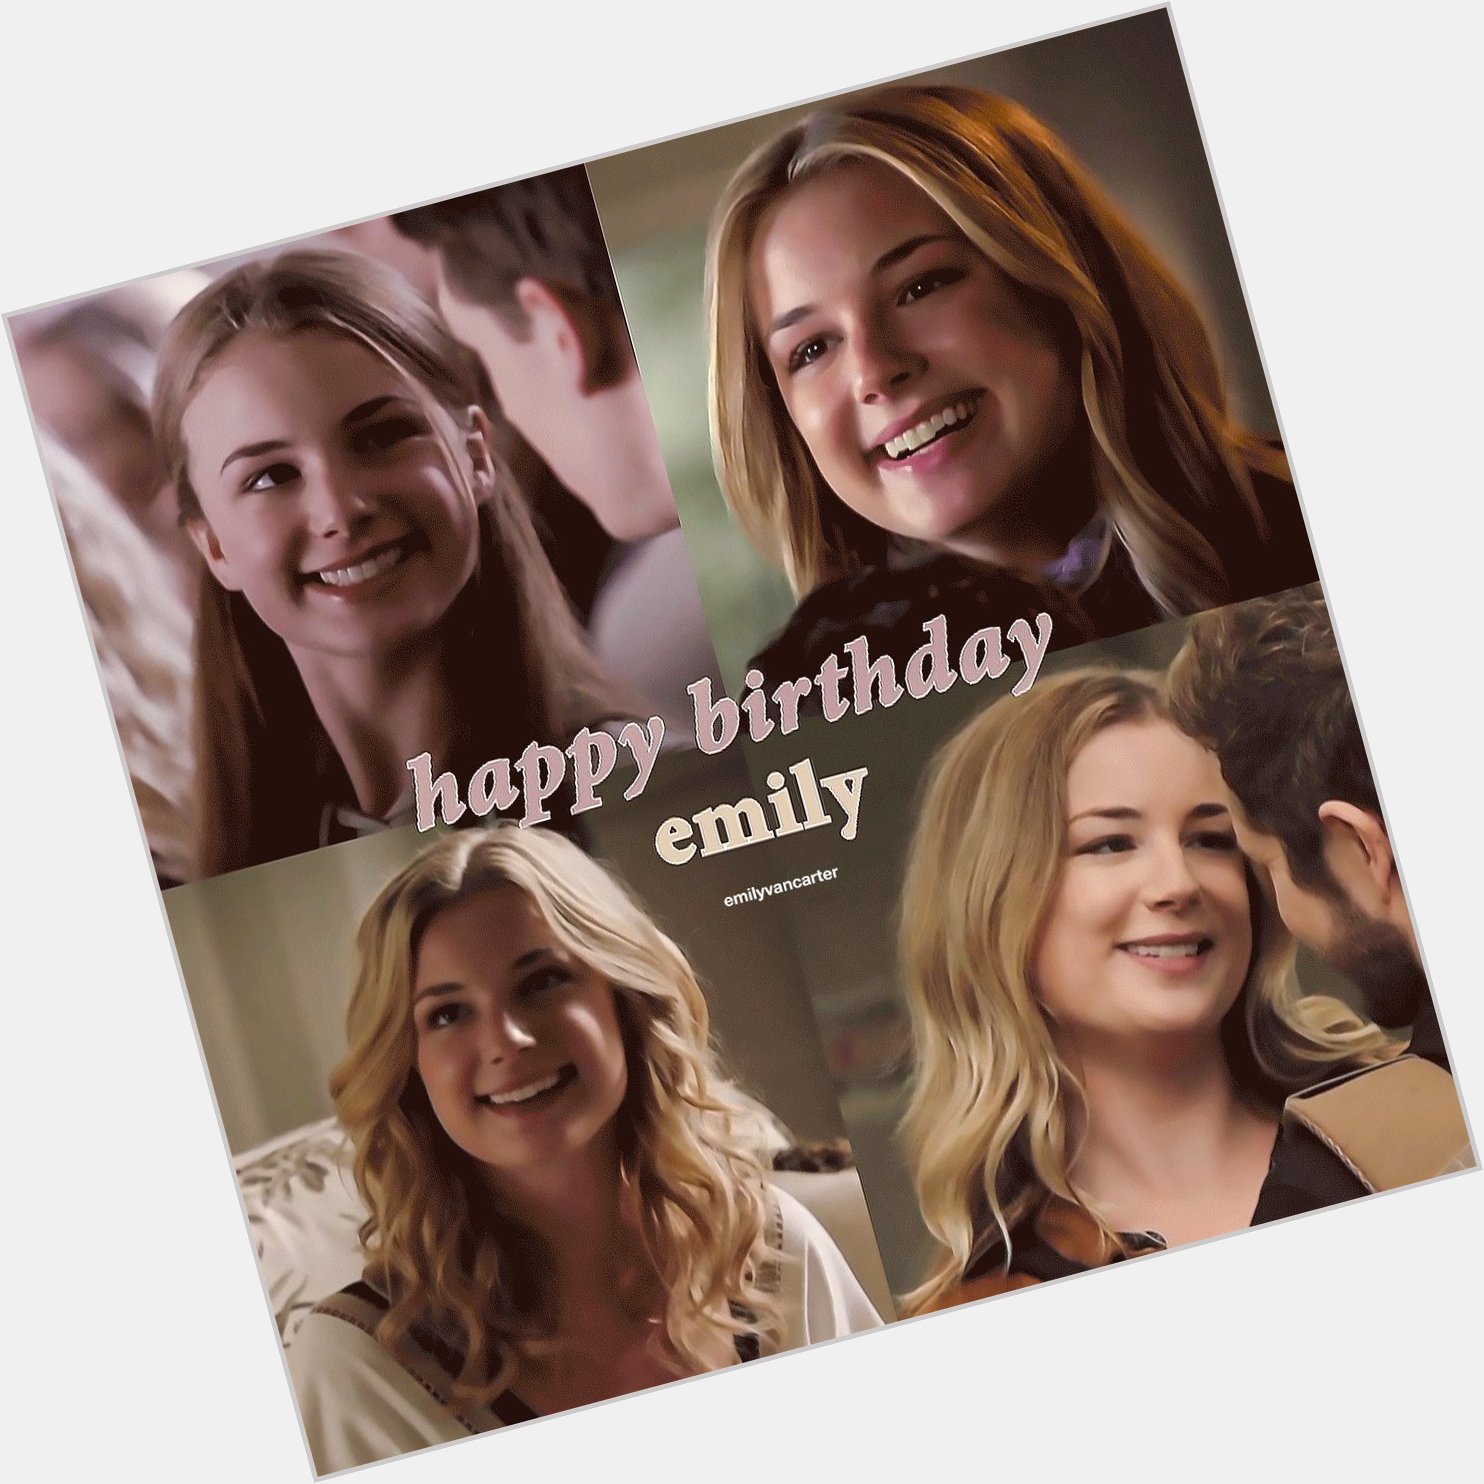 Happy birthday, emily vancamp!!

the world is a much brighter place with you in it. we love you forever <3 